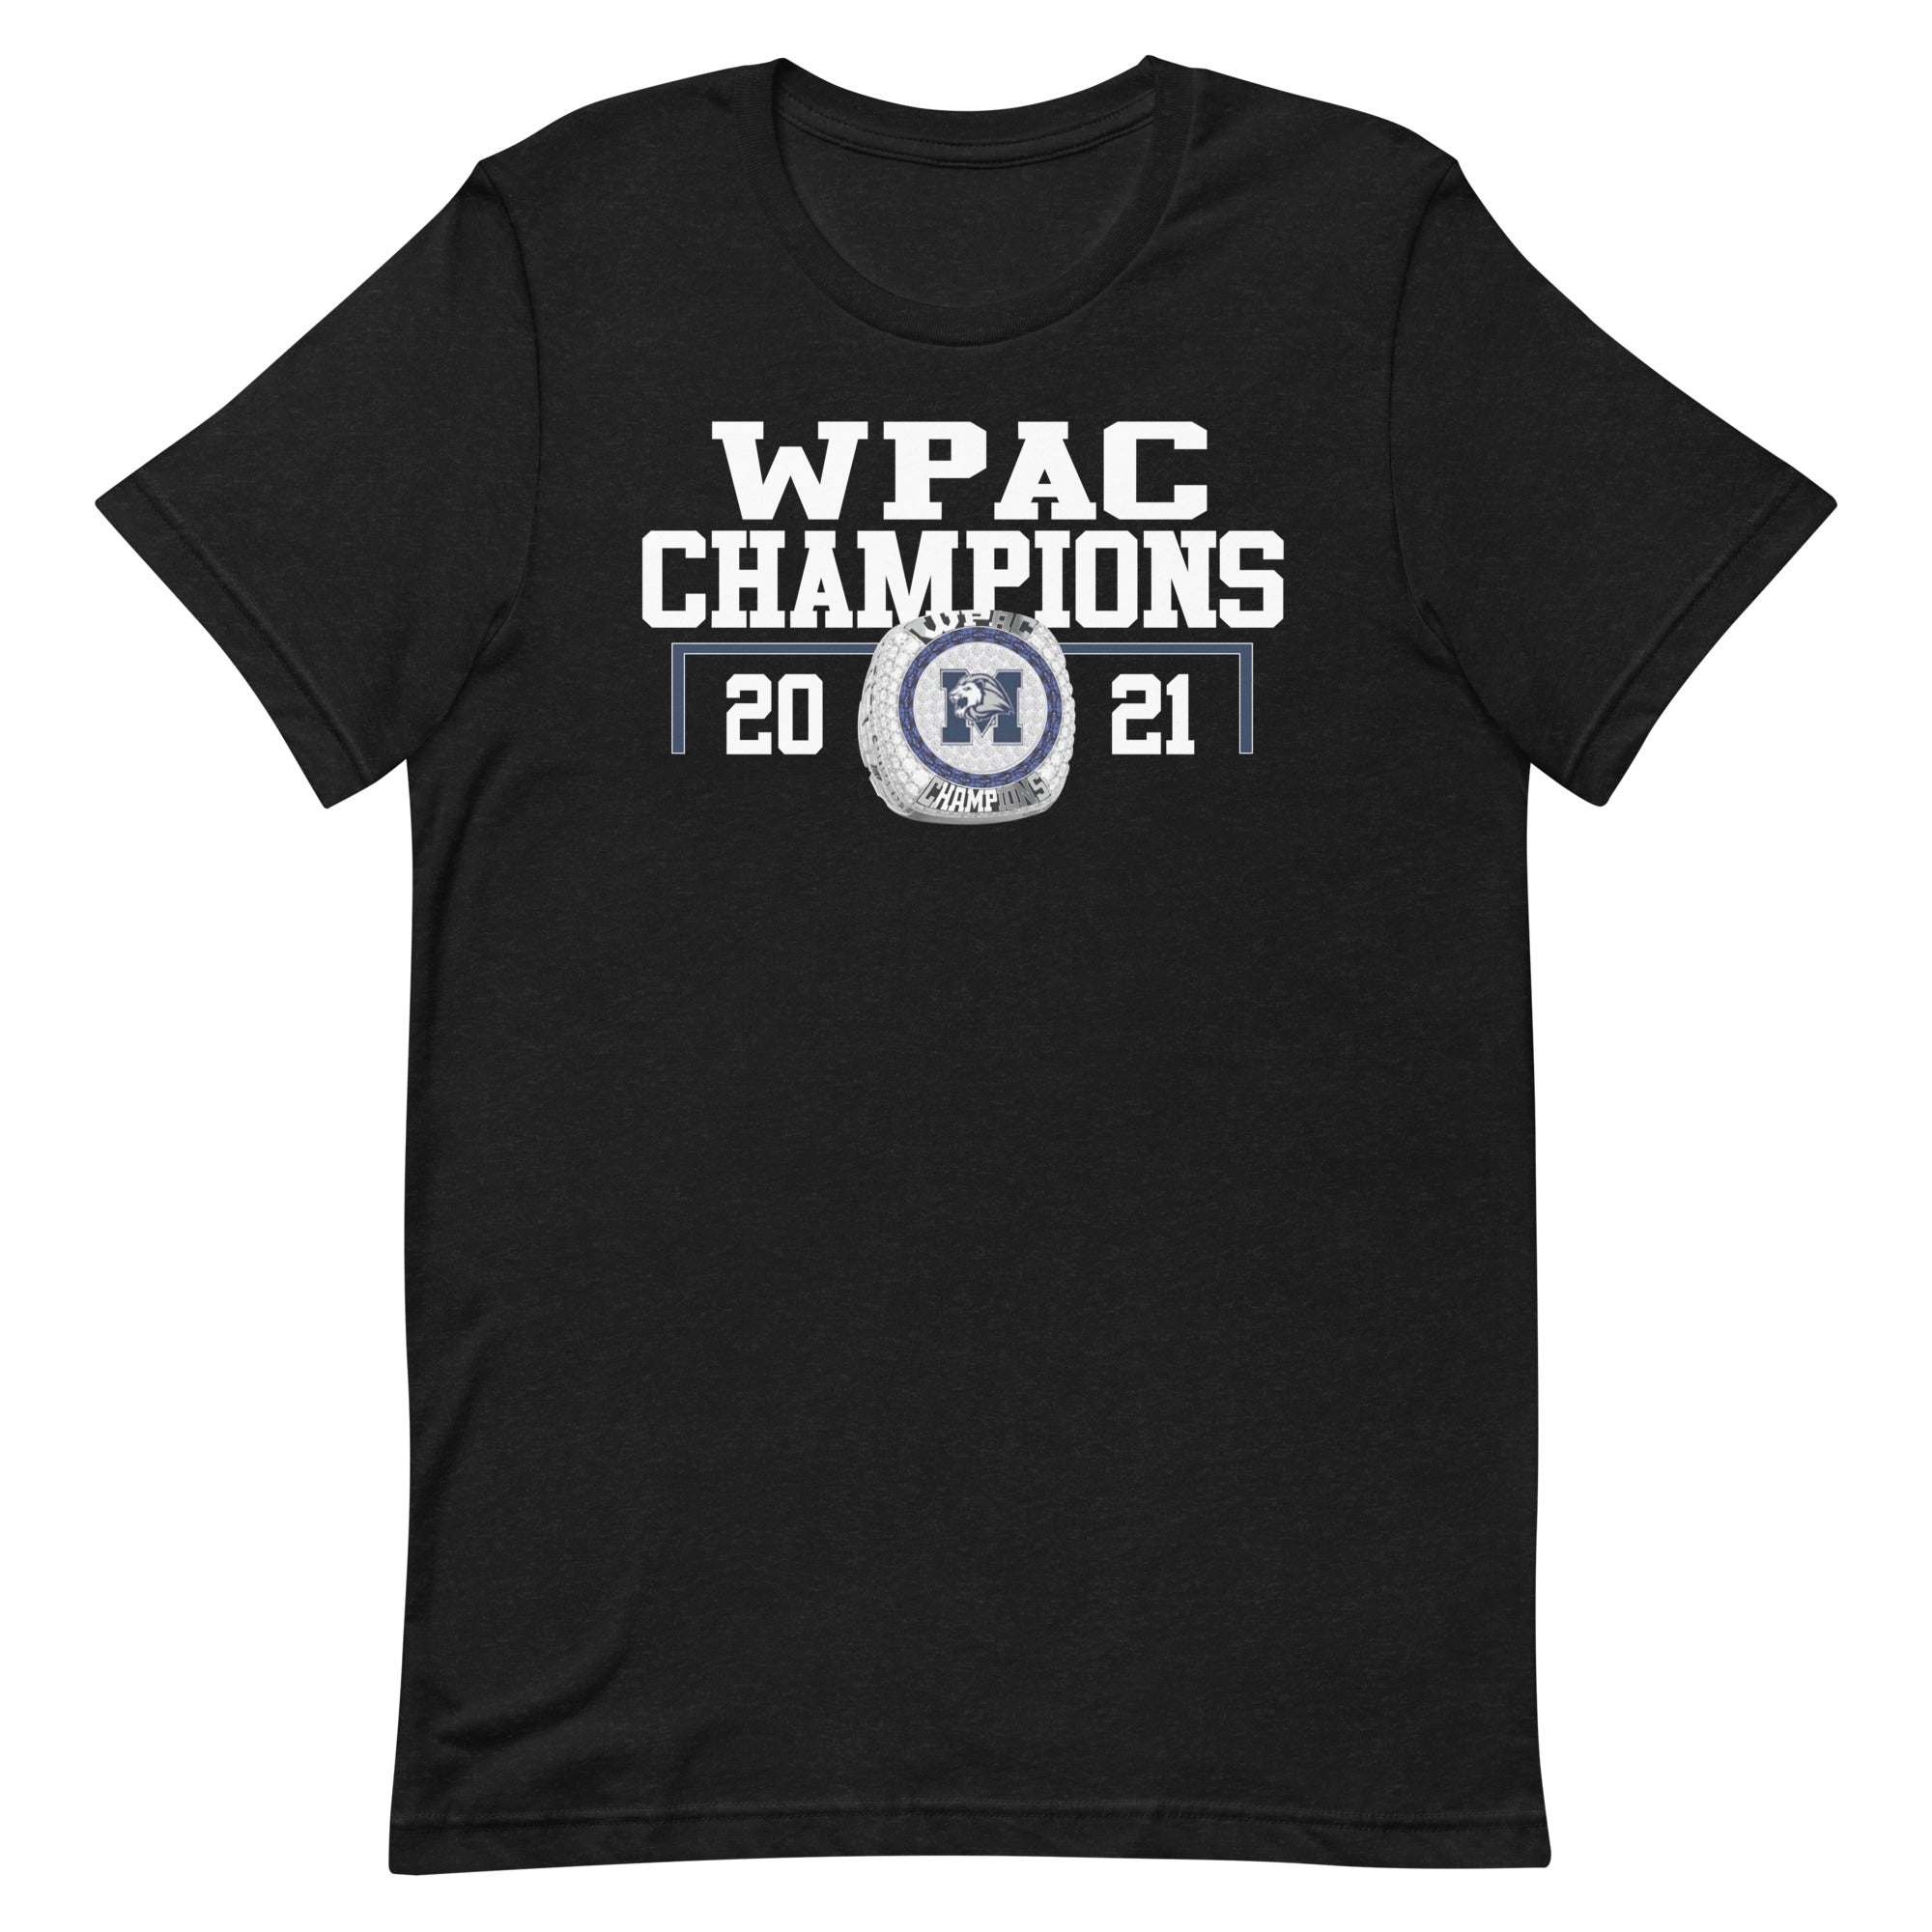 The Master’s Academy 2021 WPAC Champions Unisex t-shirt